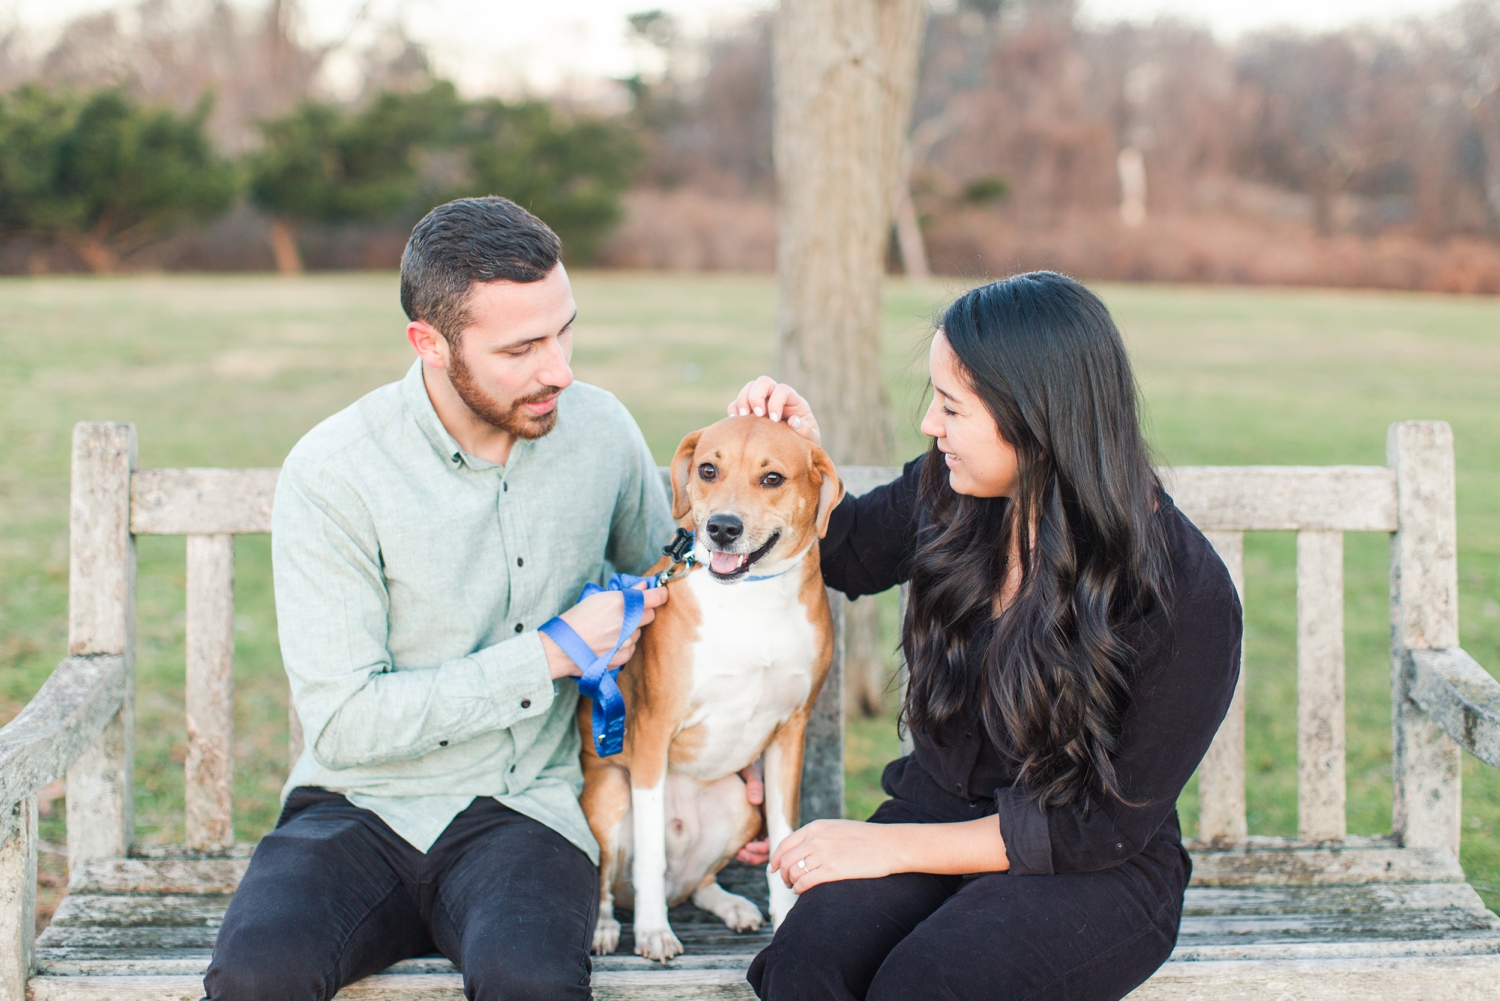 tods-point-engagement-session-greenwich-connecticut-wedding-photographer-shaina-lee-photography-photo